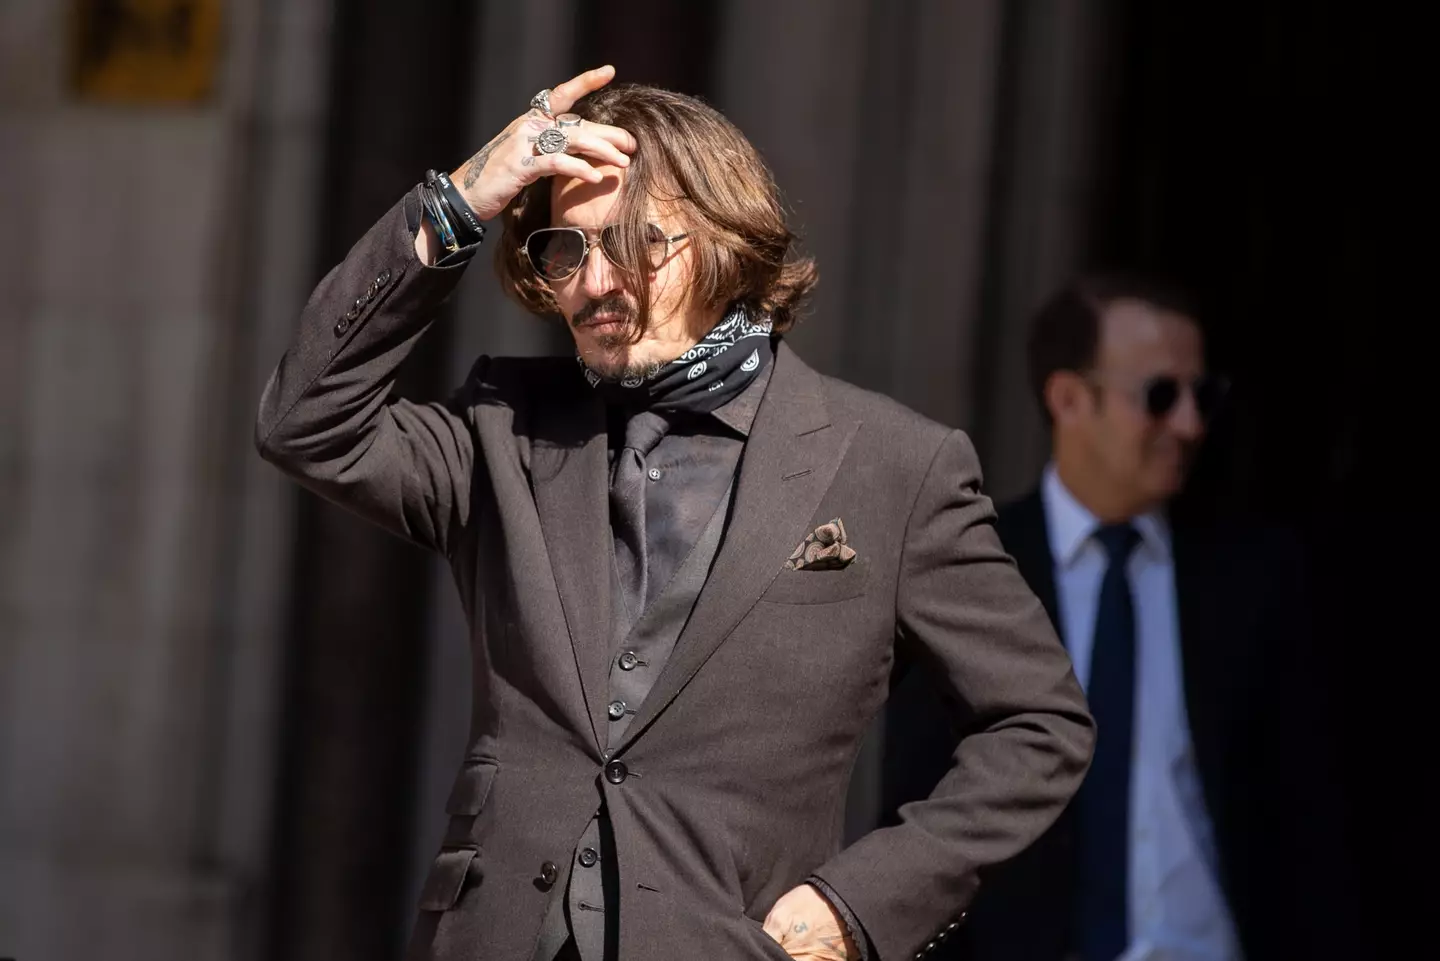 Johnny Depp has arrived in Paris where filming for Maiwenn’s new historical drama is expected to begin.